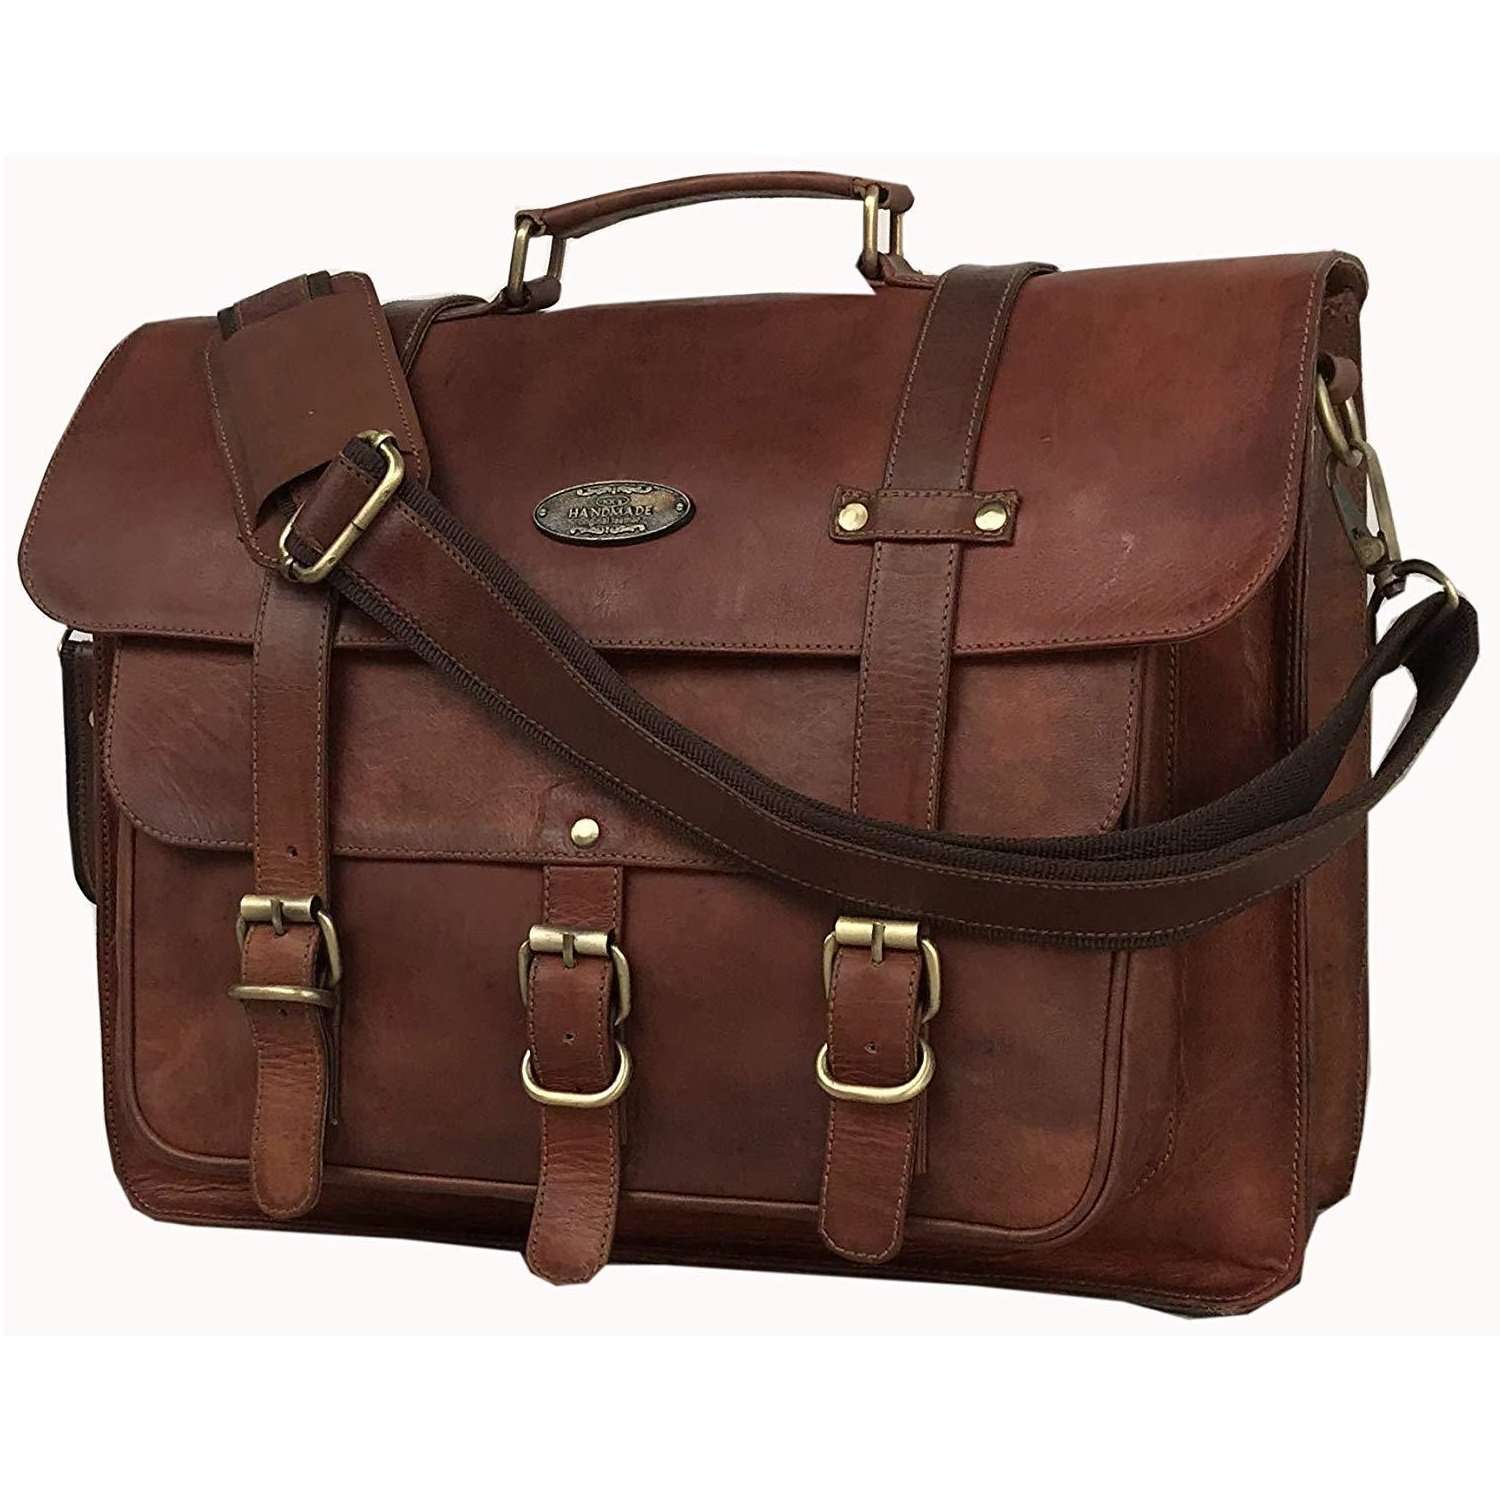 Best Rugged Brown Leather Bag Suppliers in Delhi, Rugged Brown Leather ...